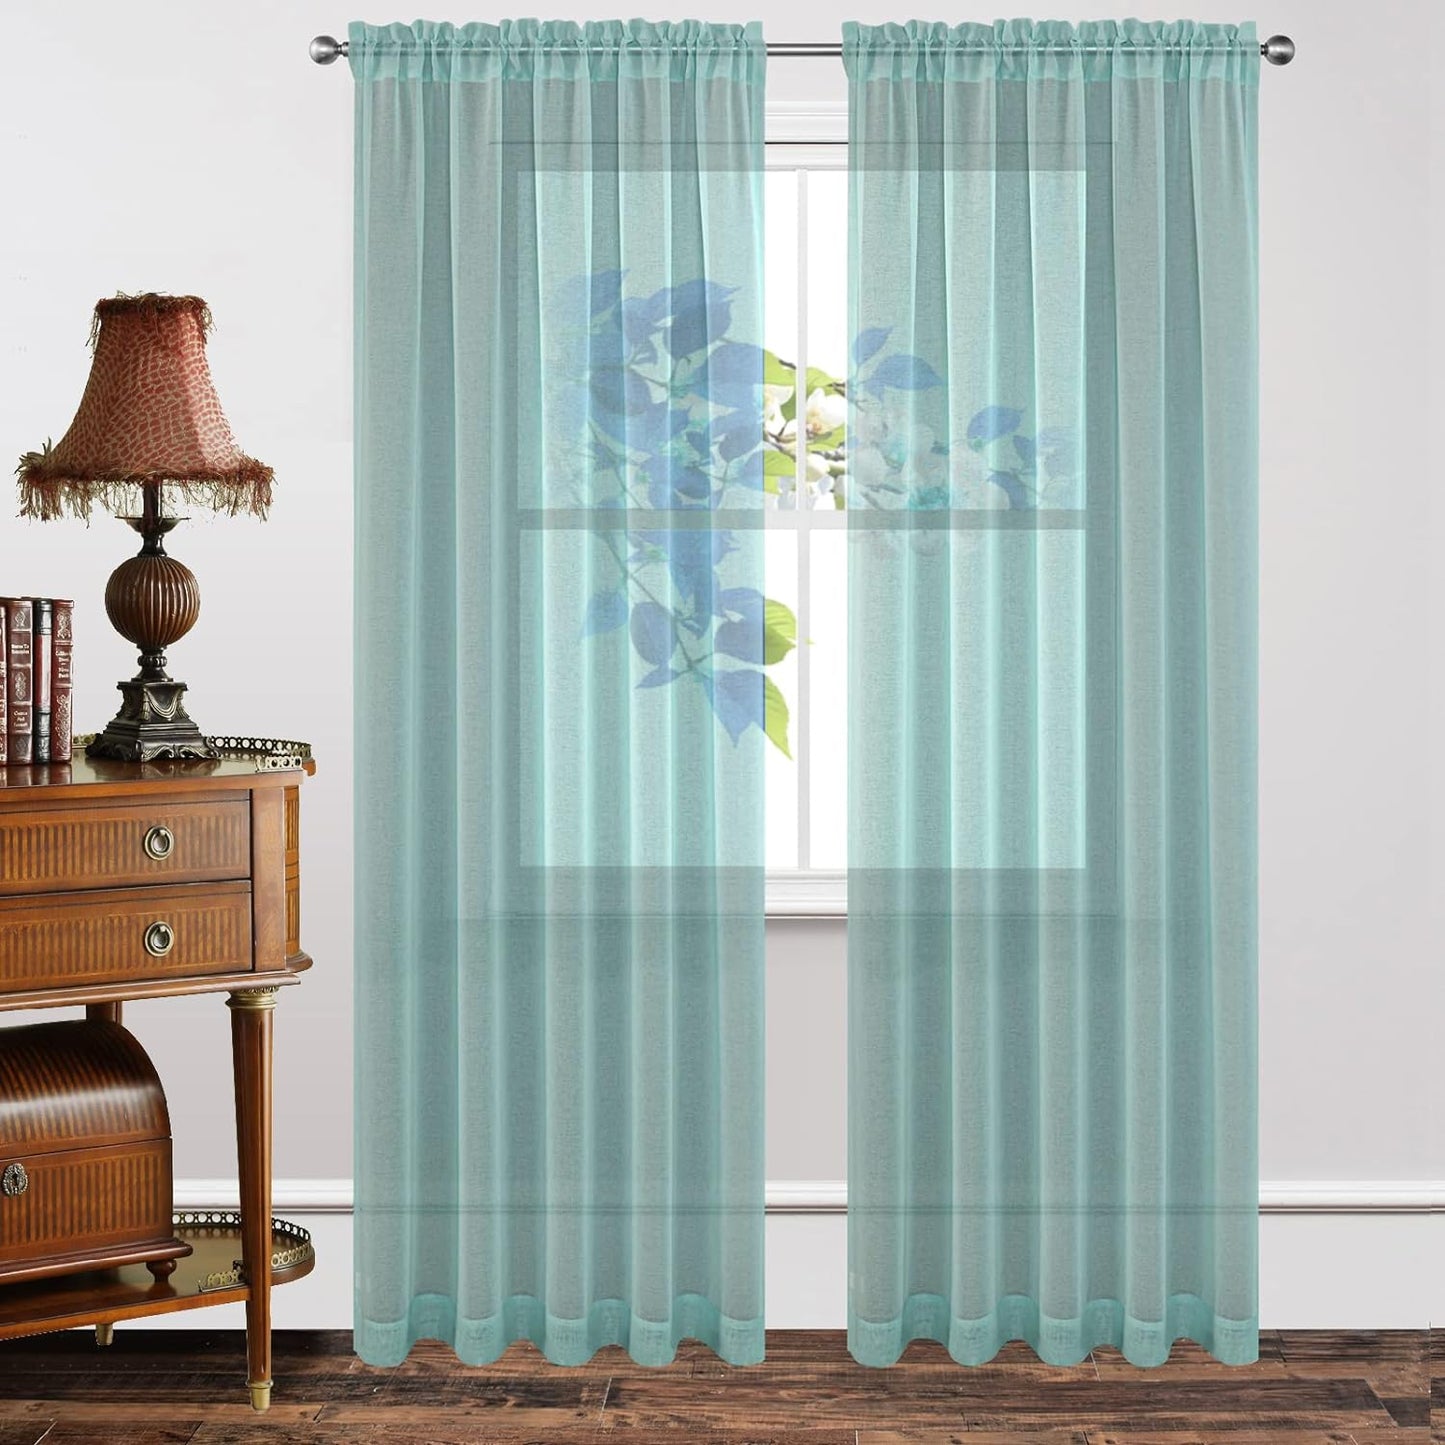 Joydeco White Sheer Curtains 63 Inch Length 2 Panels Set, Rod Pocket Long Sheer Curtains for Window Bedroom Living Room, Lightweight Semi Drape Panels for Yard Patio (54X63 Inch, off White)  Joydeco Teal Blue 54W X 84L Inch X 2 Panels 